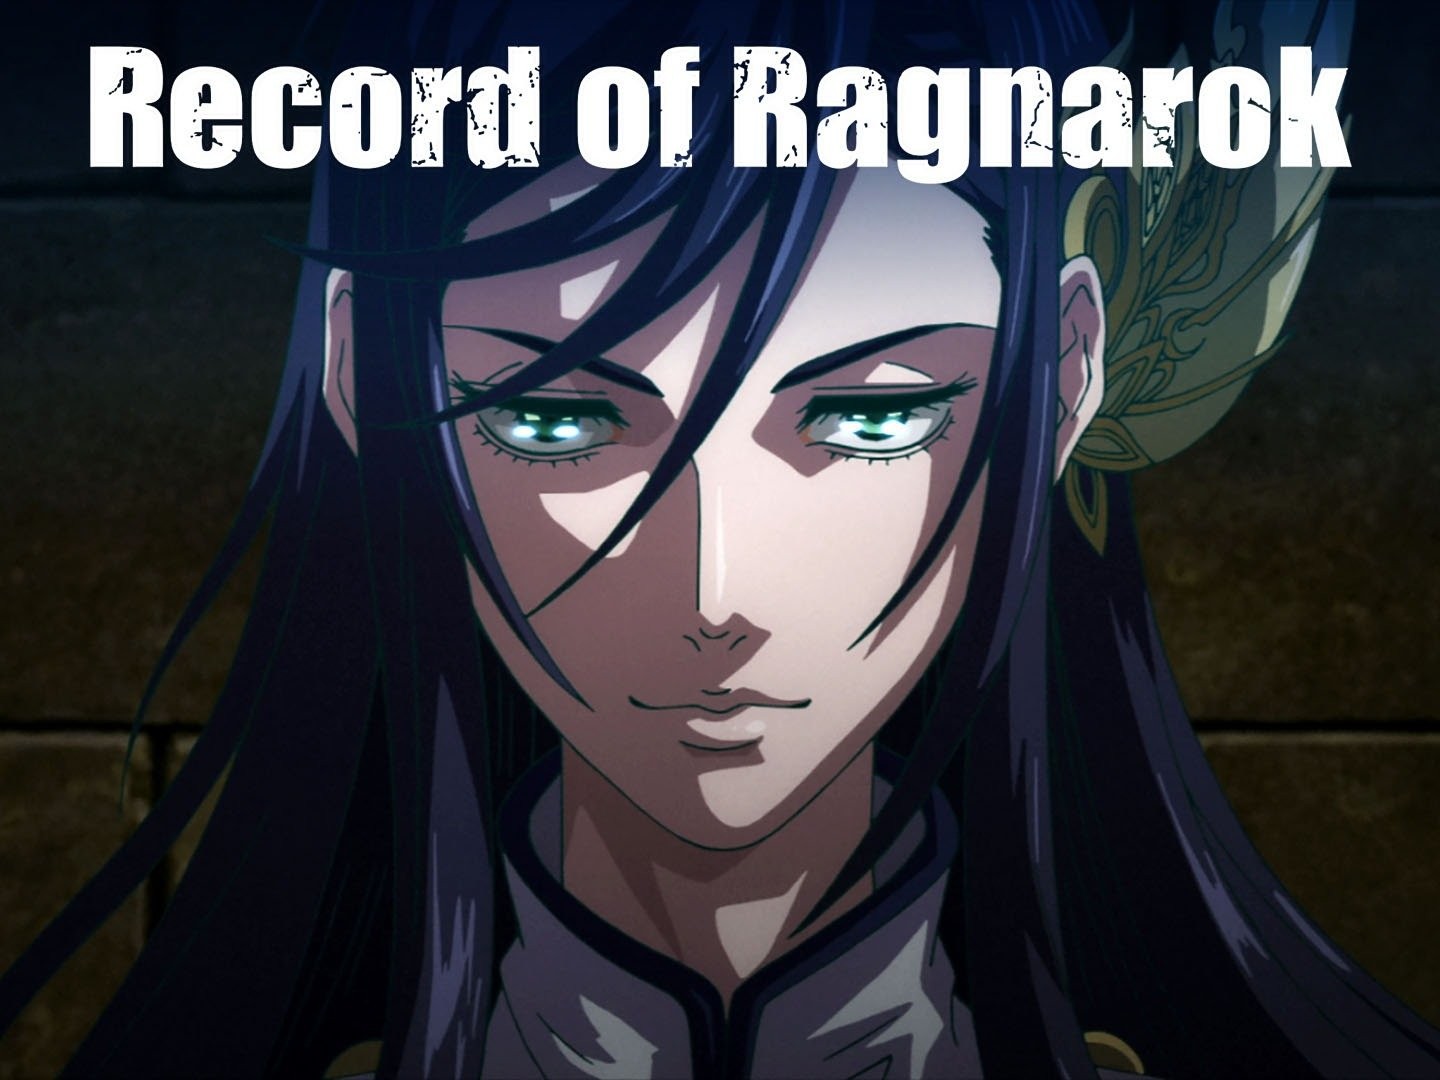 Has anyone watched the Record of Ragnarok anime in India? I really want to  and even though I found a place to watch it online I have some hesitation  since it's banned. 